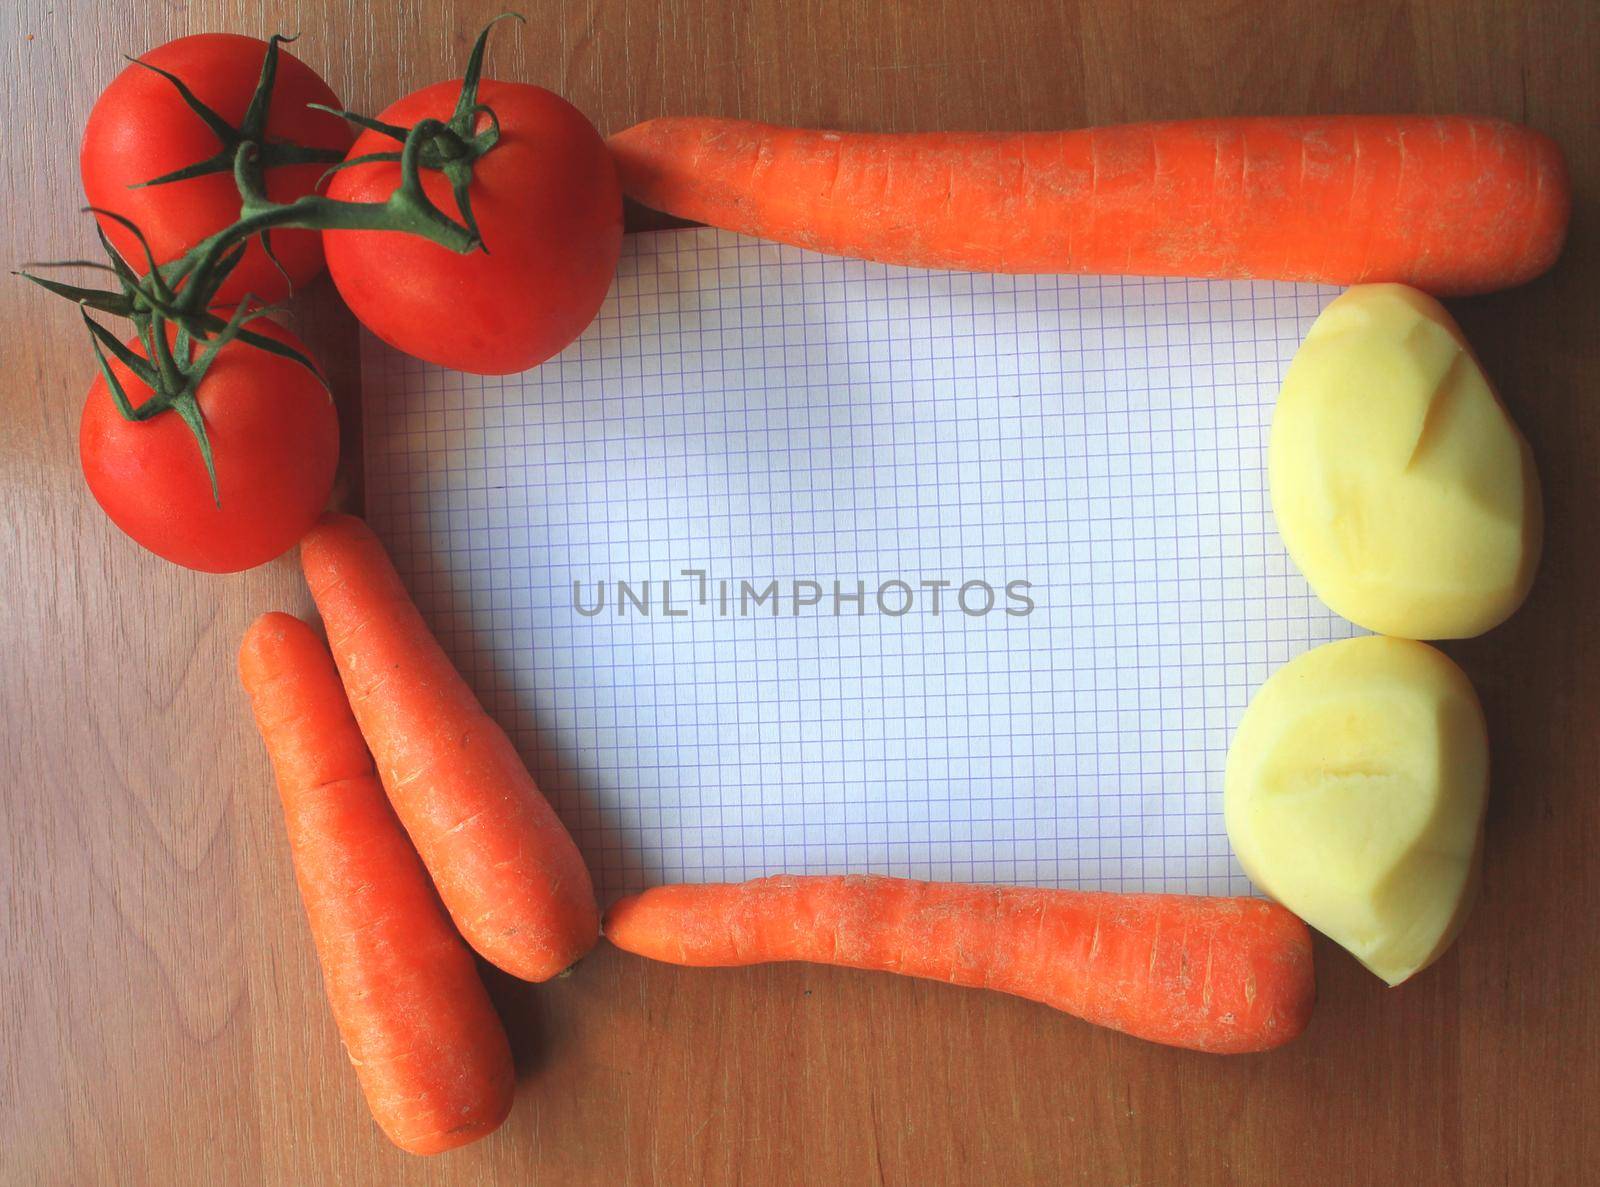 tomatoes and carrot on a wooden background with sheet of paper and potatoes by JackyBrown